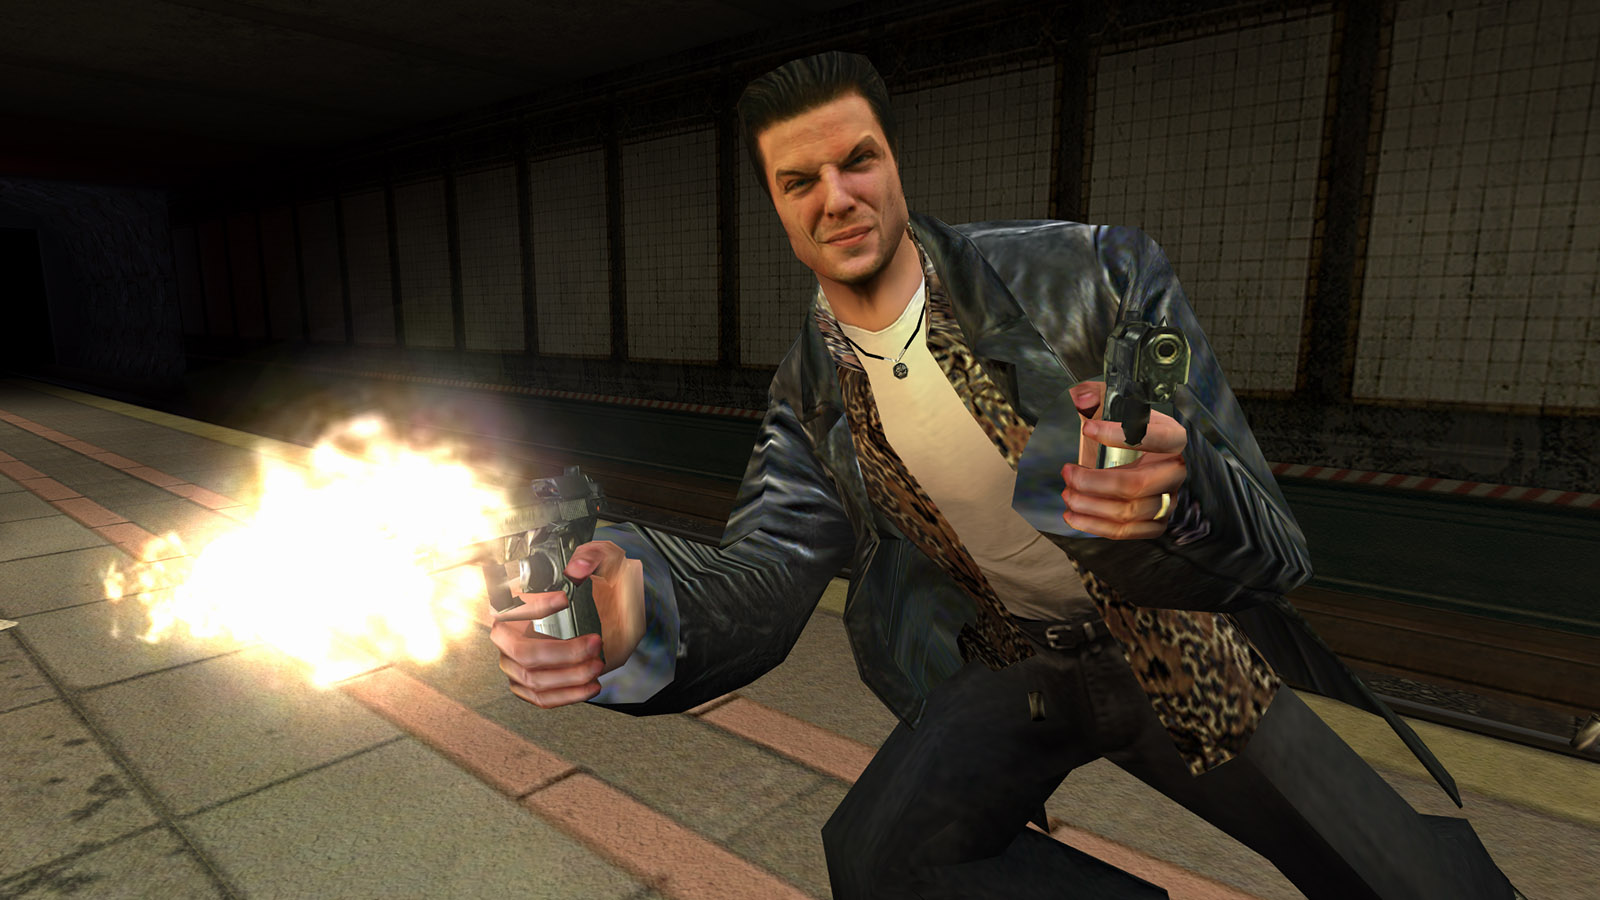 Should Next Max Payne Game Be A Sequel, Prequel Or A Reboot? - Gaming  Central